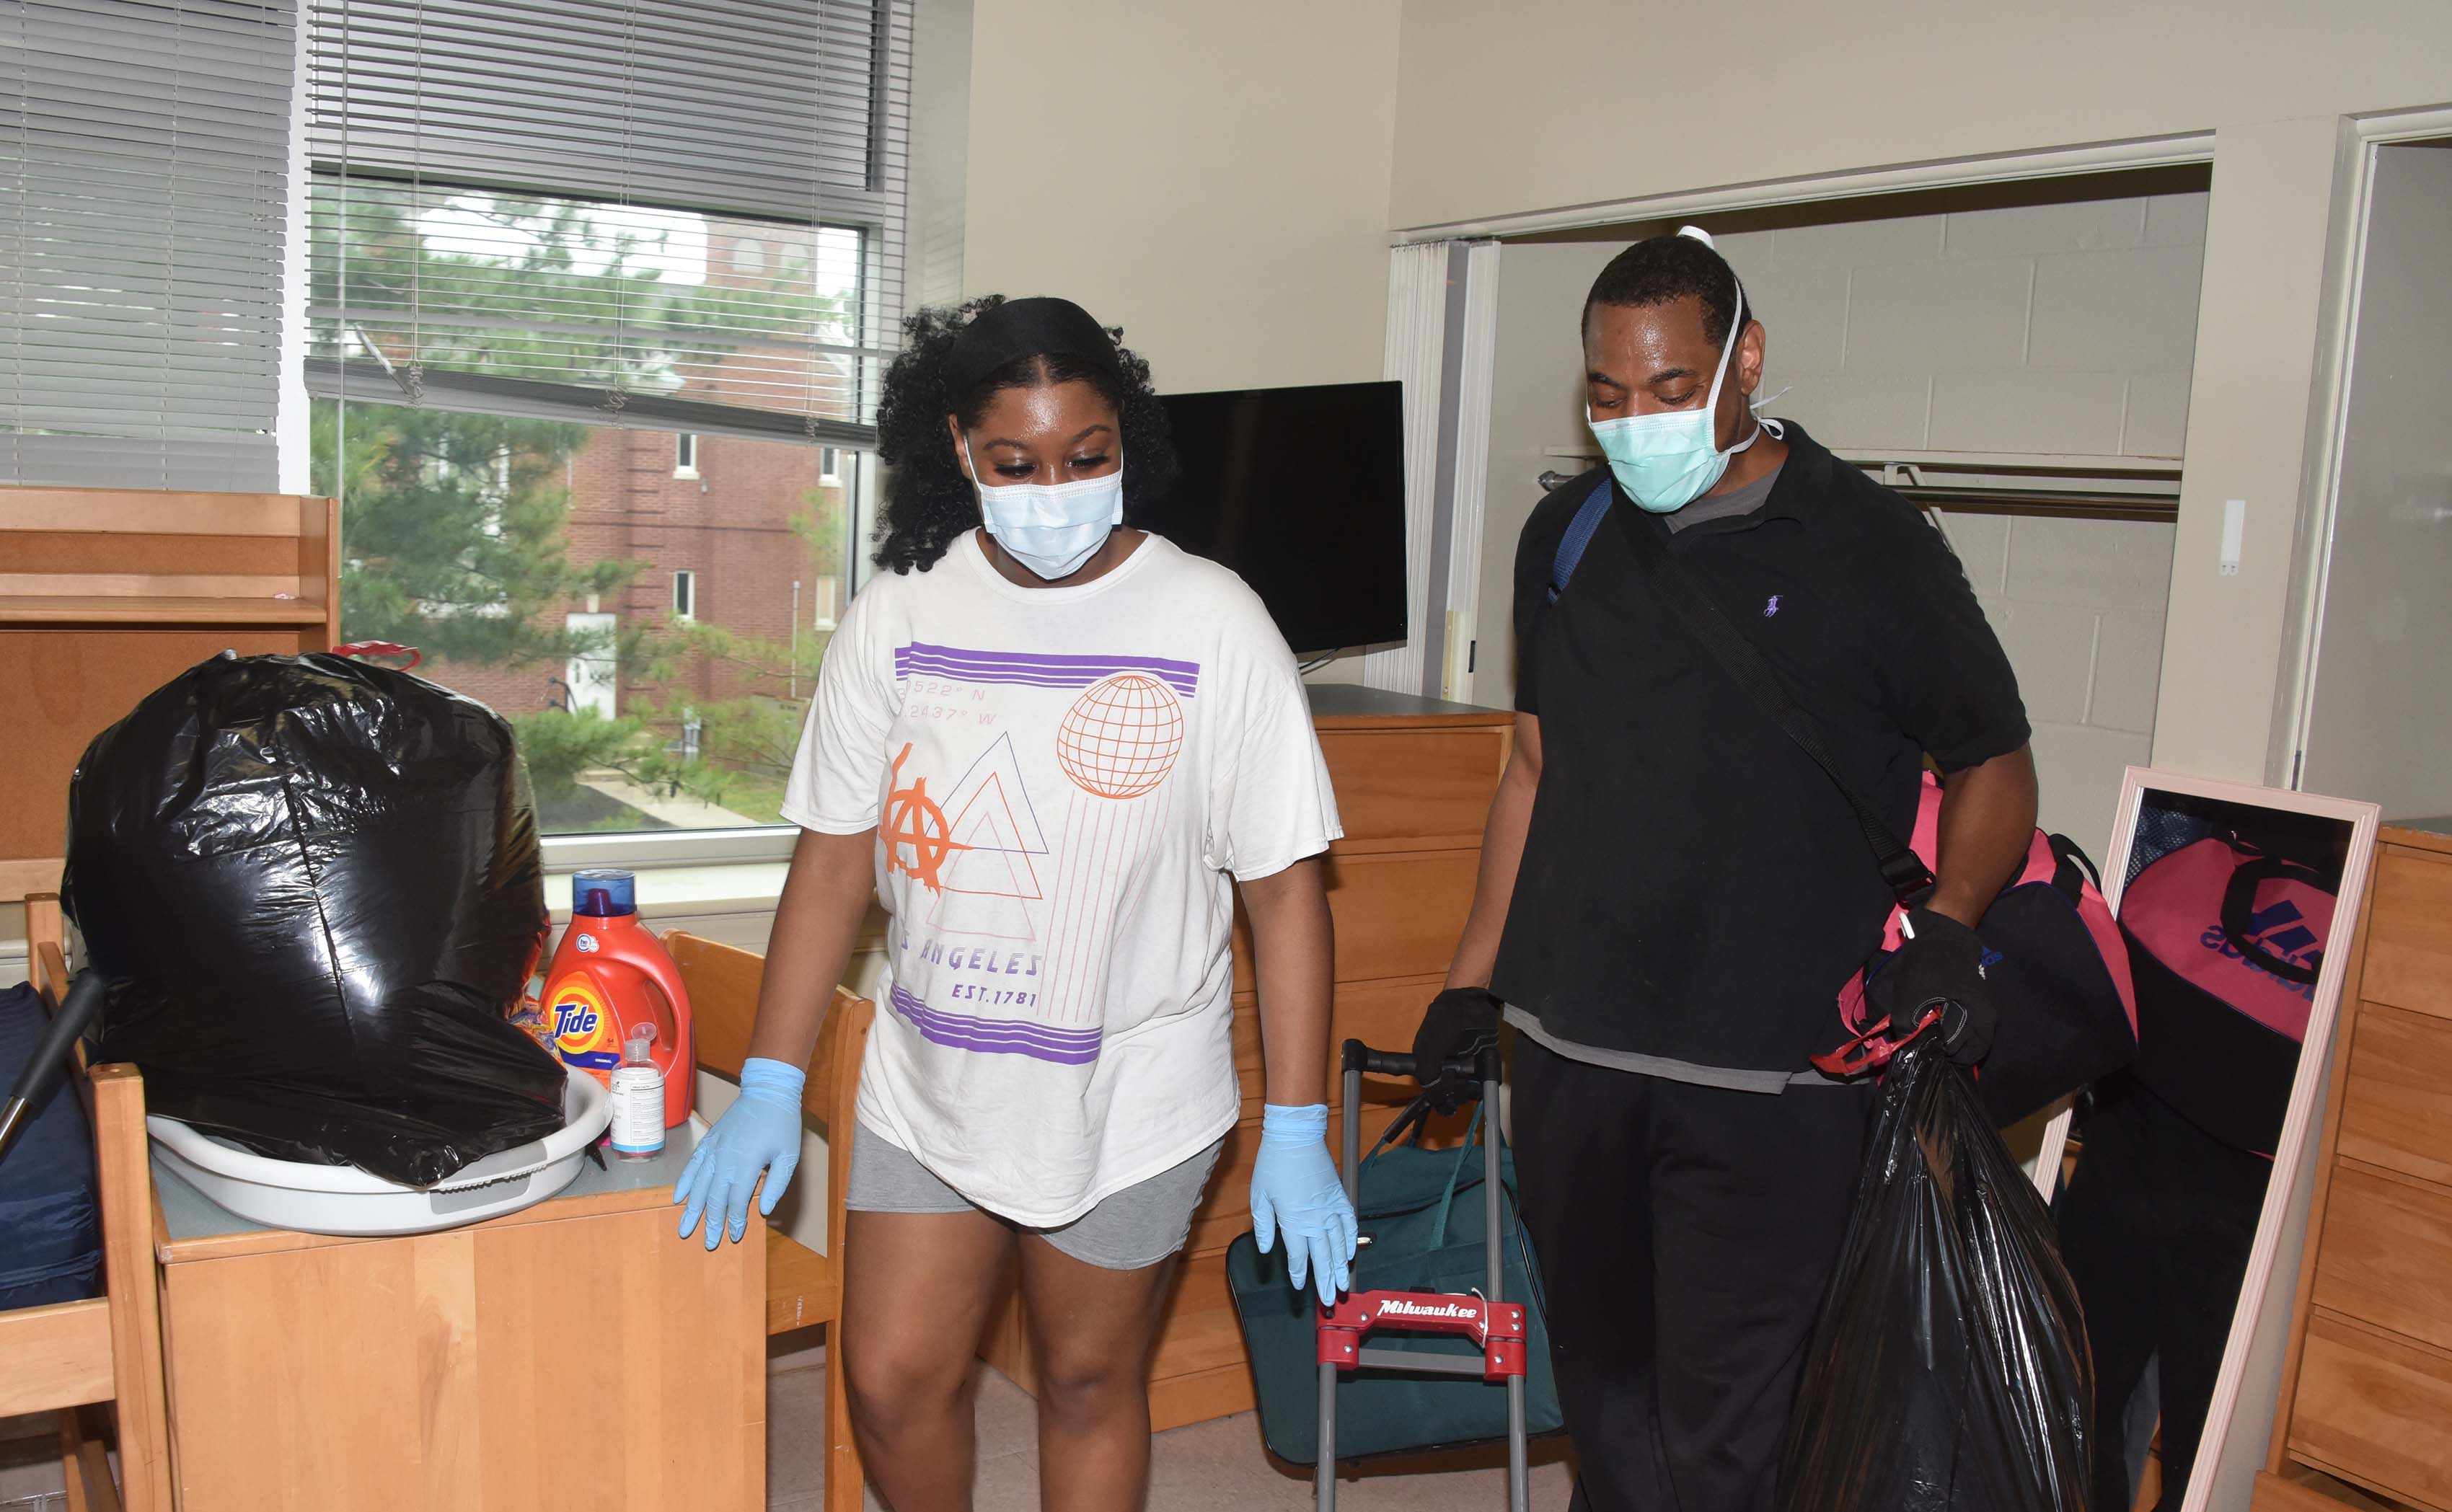 Kirsten Briscoe enlisted her dad Anthony Briscoe to help her collect her belongings and move out of her 2019-2020 Warren Franklin Residential Hall room.